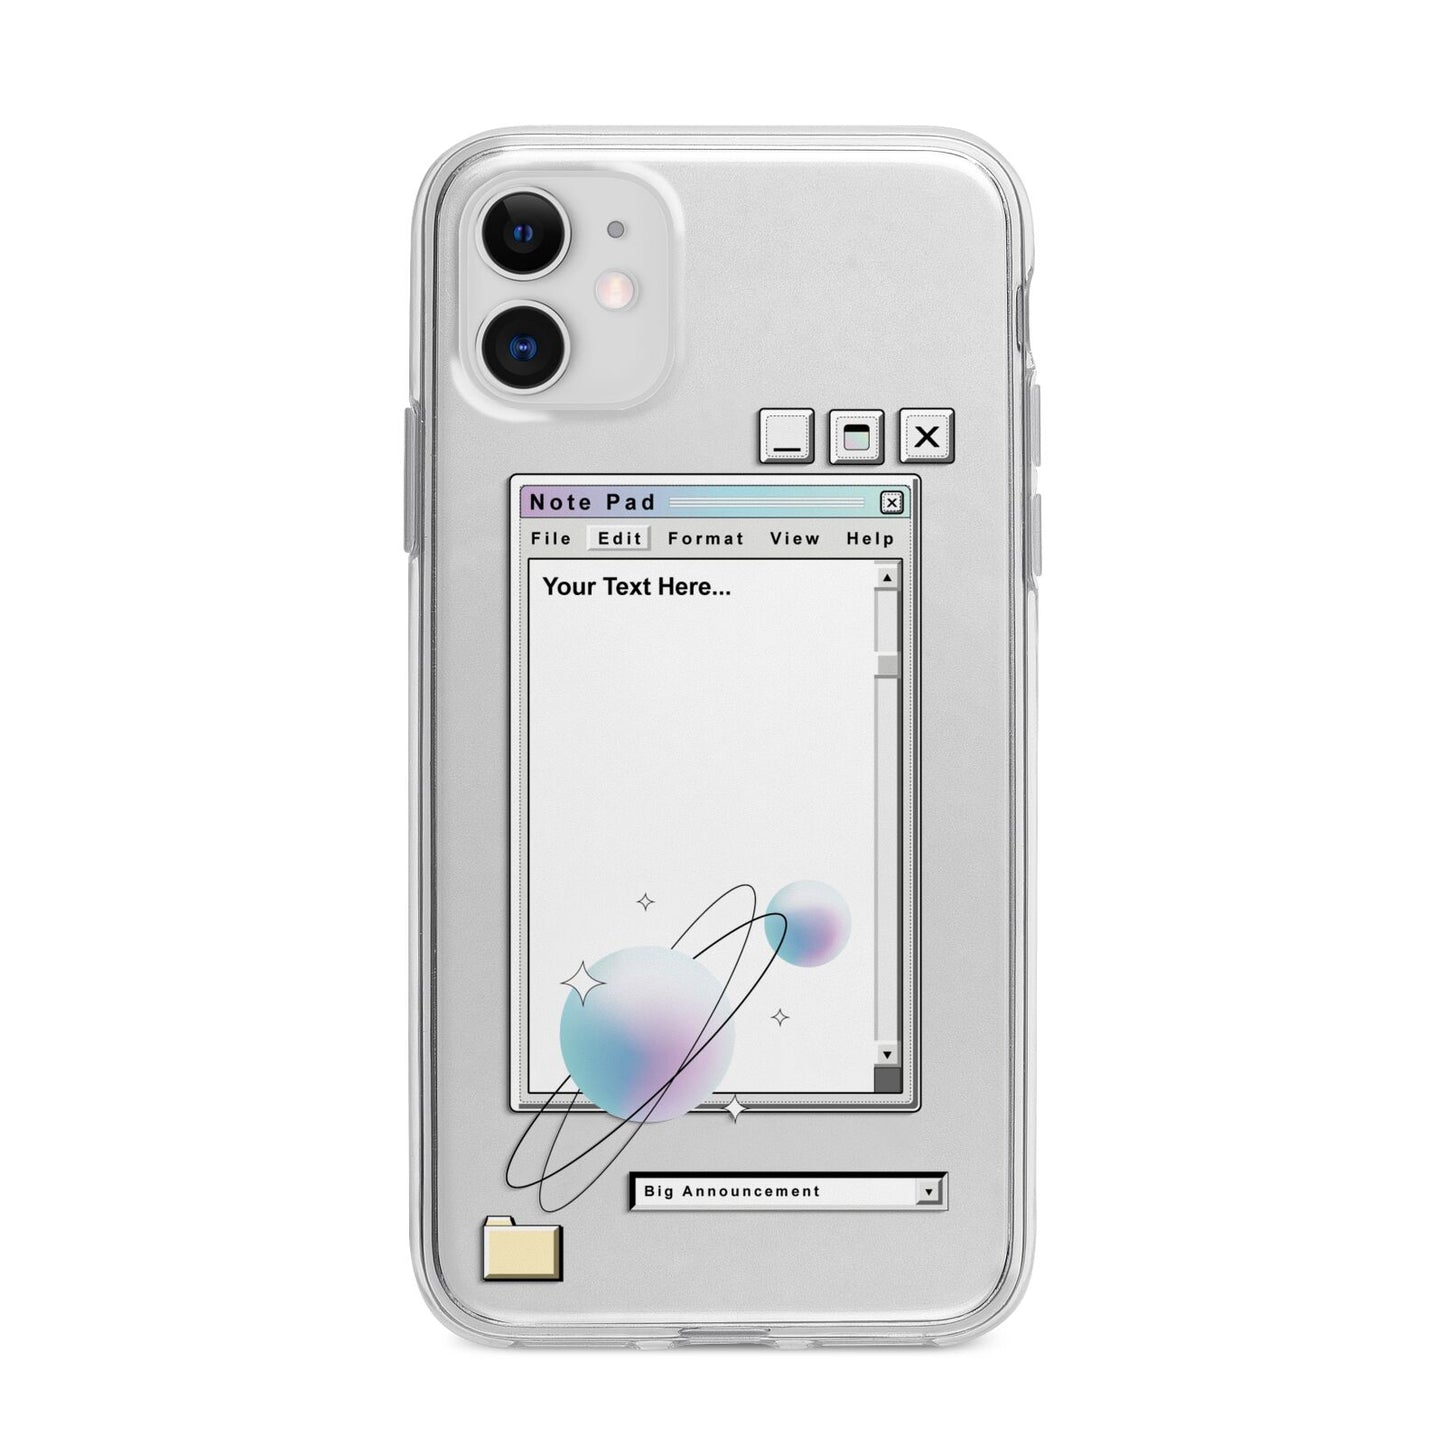 Retro Note Pad Apple iPhone 11 in White with Bumper Case